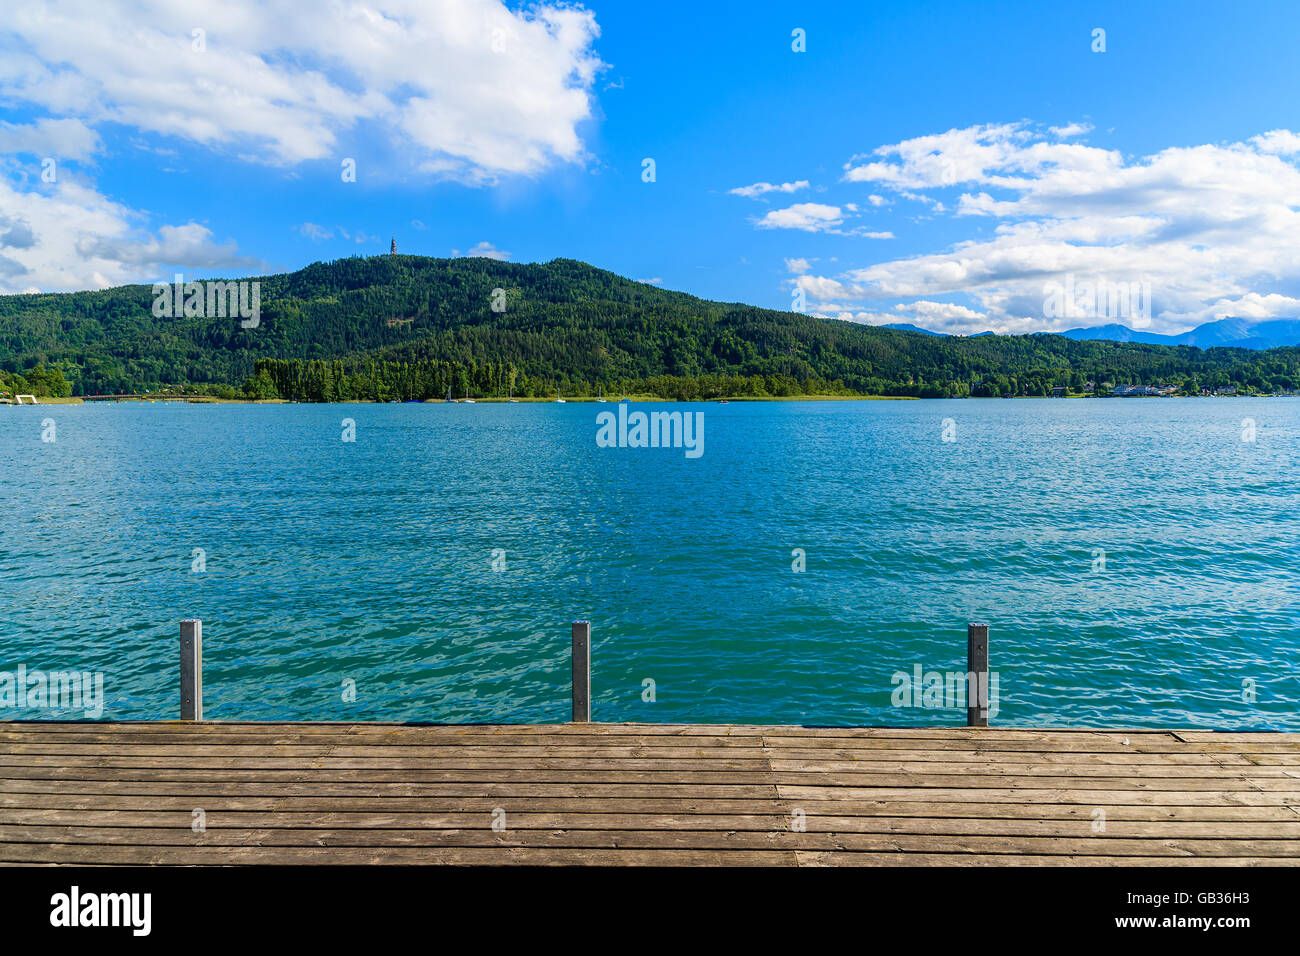 Promenade along Worthersee lake in summer time, Austria Stock Photo